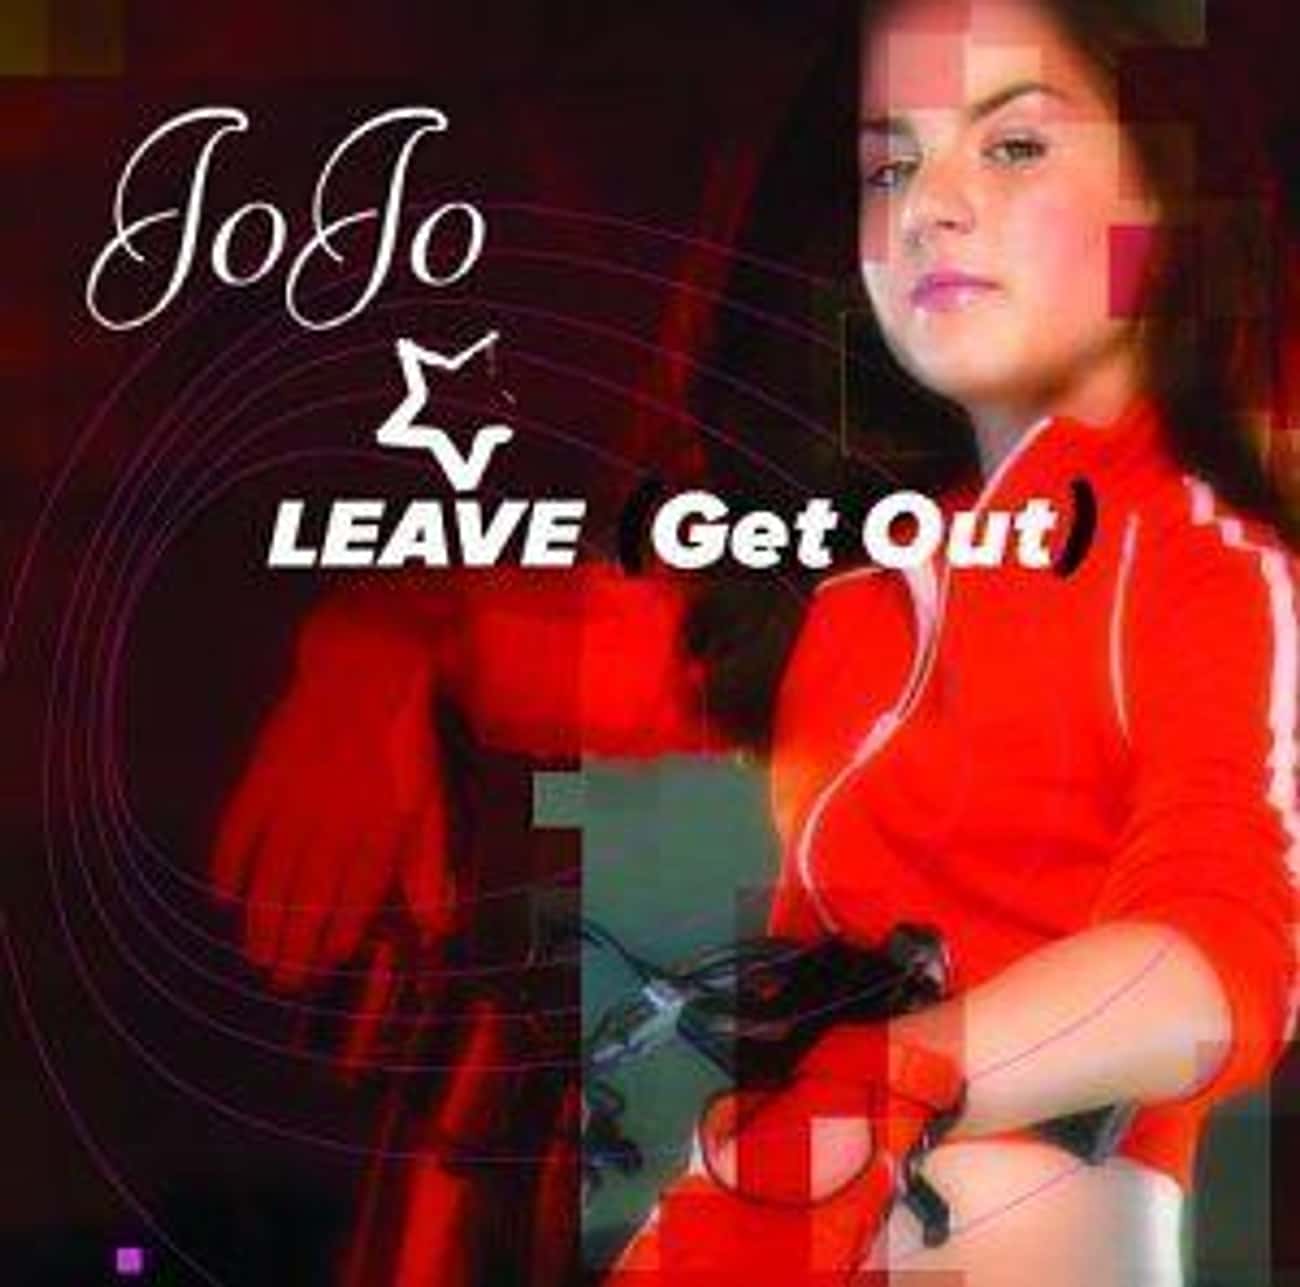 'Leave (Get Out)' - JoJo, 14